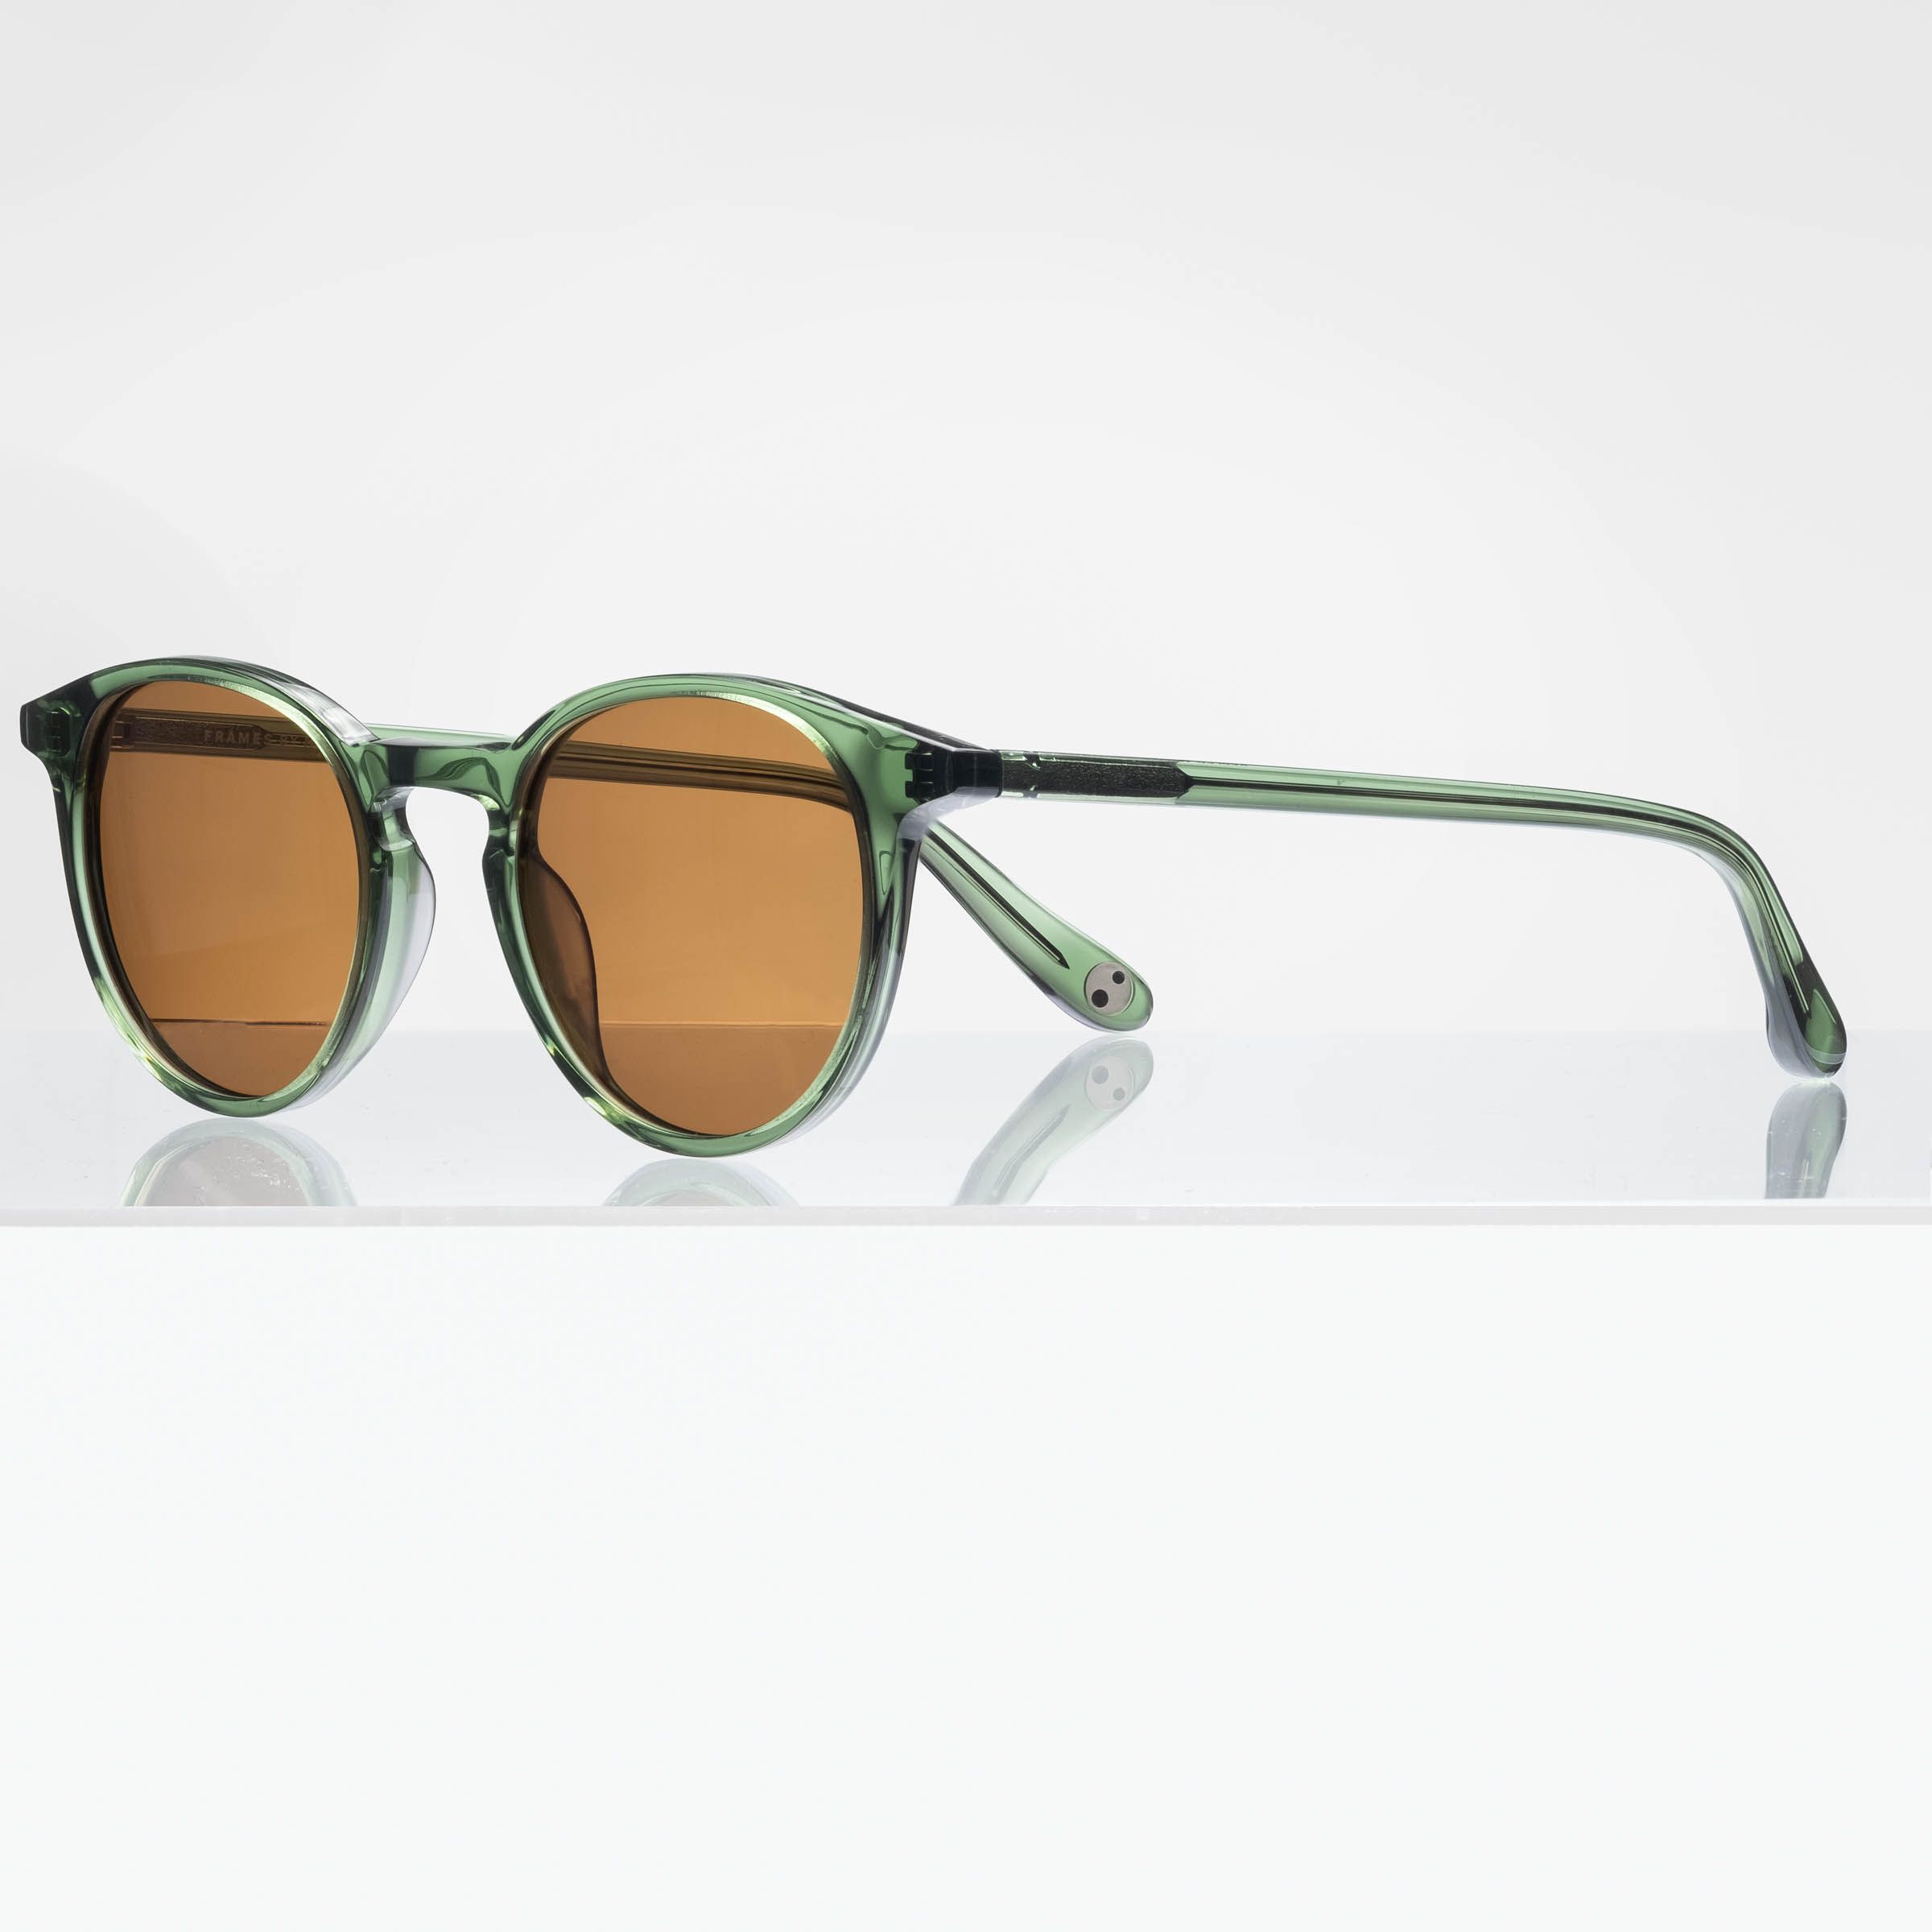 Kepler is a narrow/medium, masculine, acetate frame with polarized lenses. It is available in emerald crystal, matte eclipse and sun spot tortoise color options.